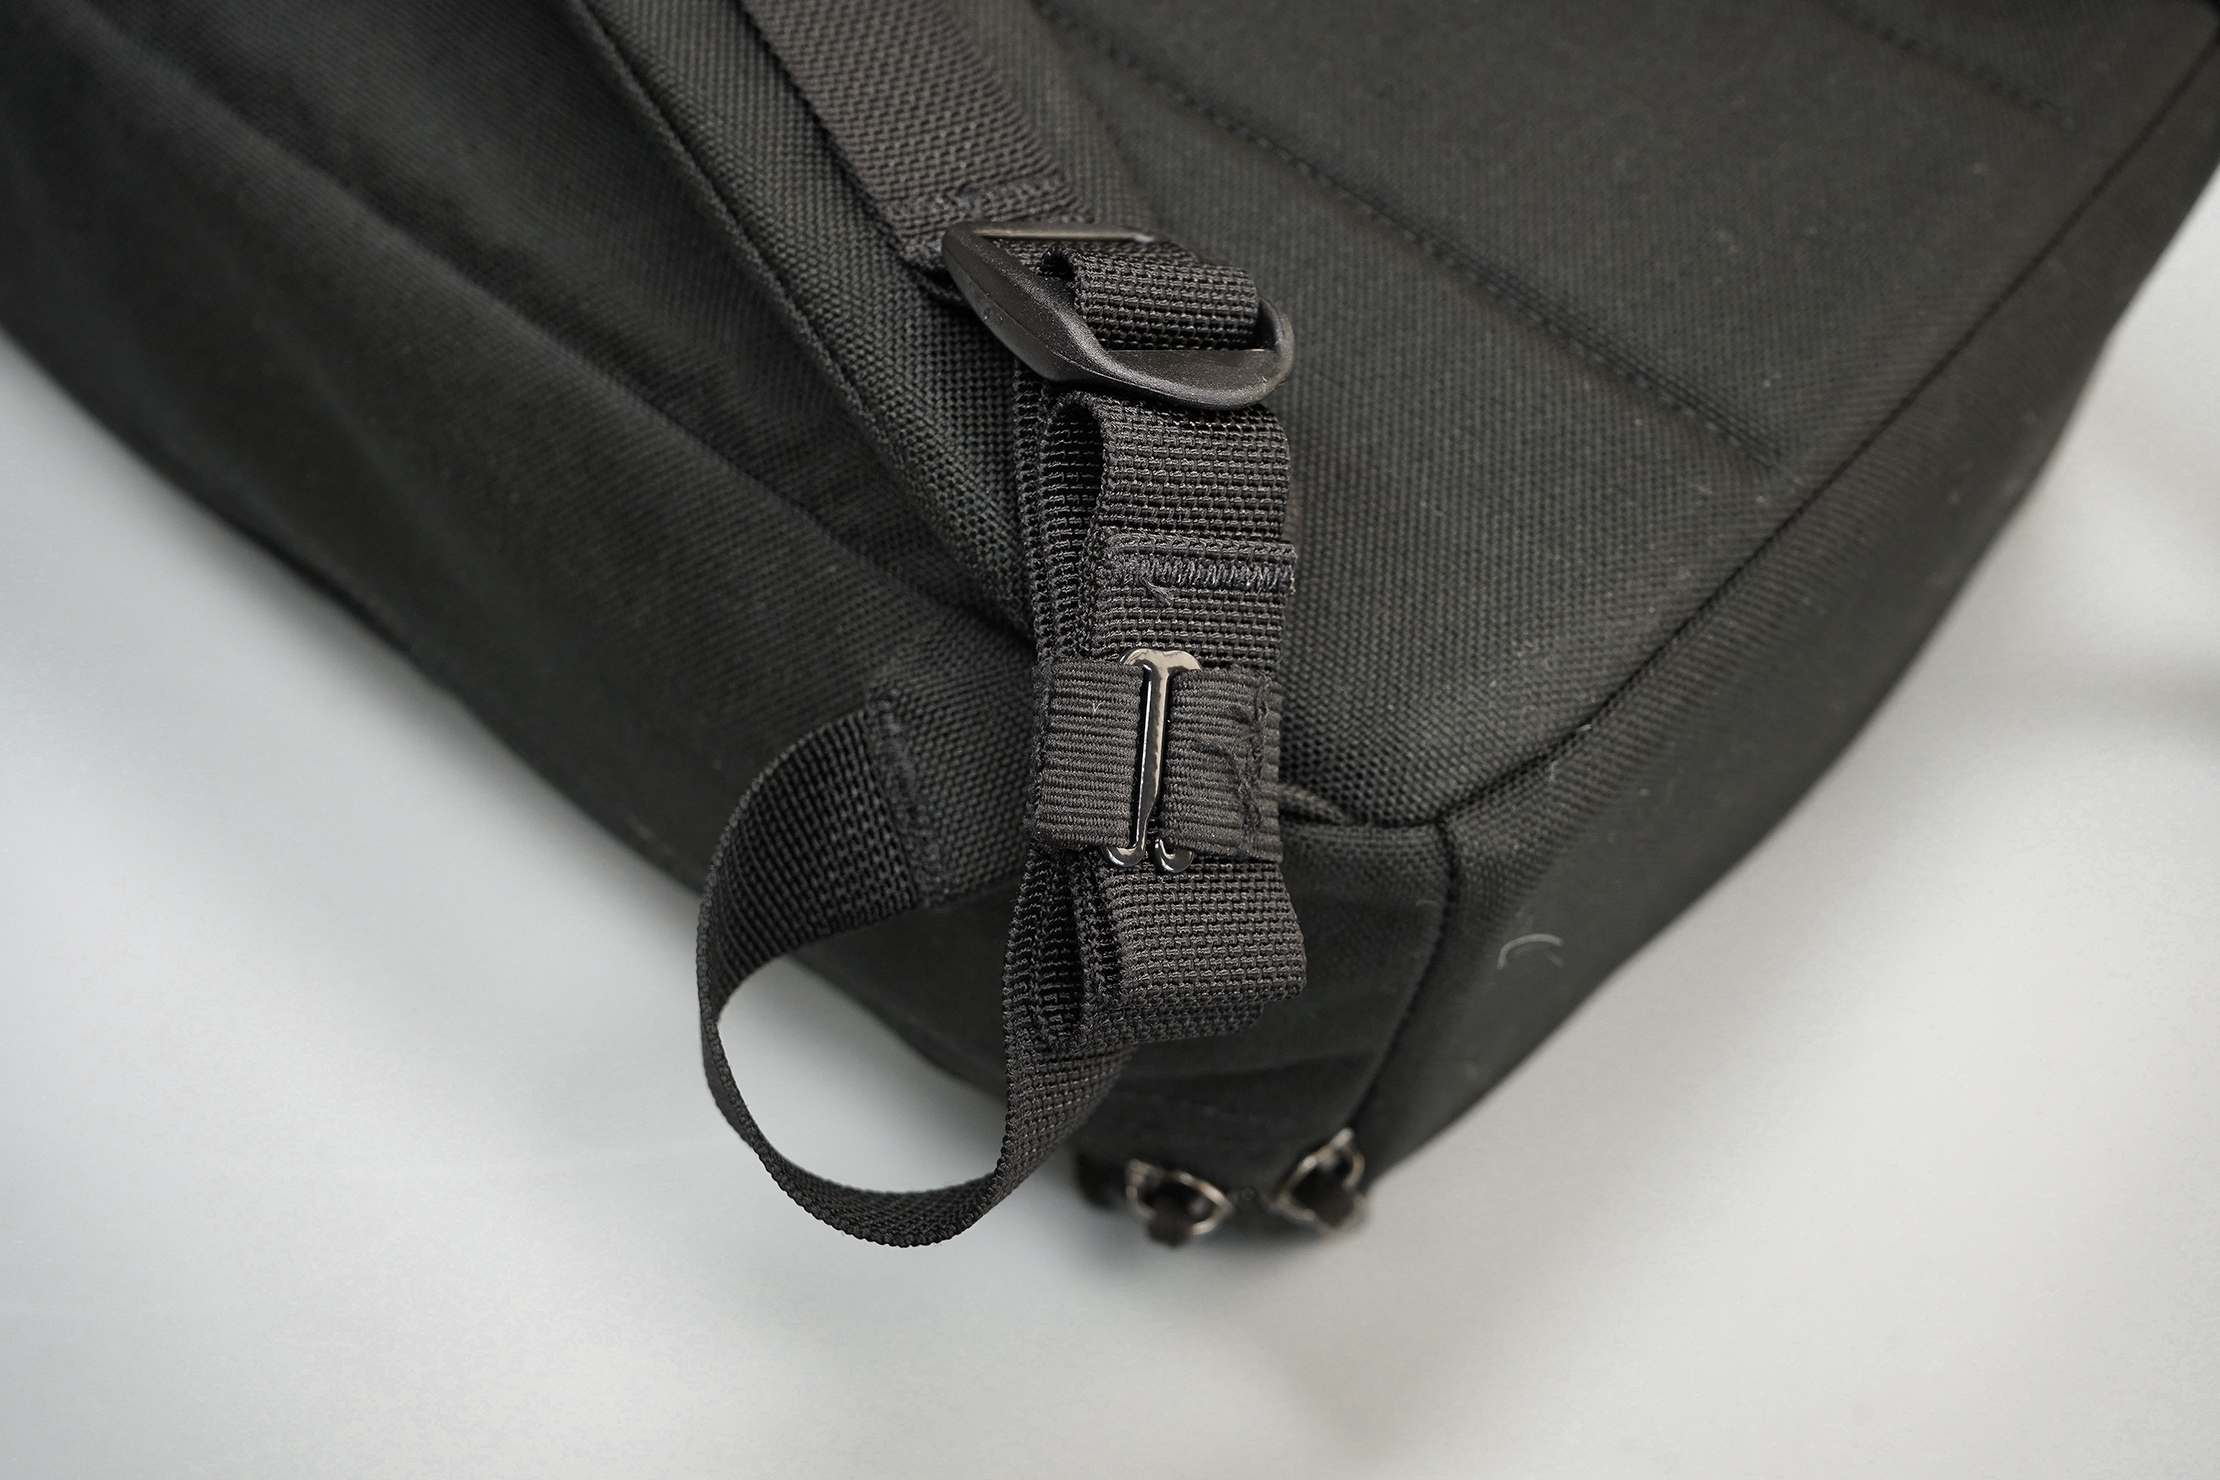 Tom Bihn Strap Keepers